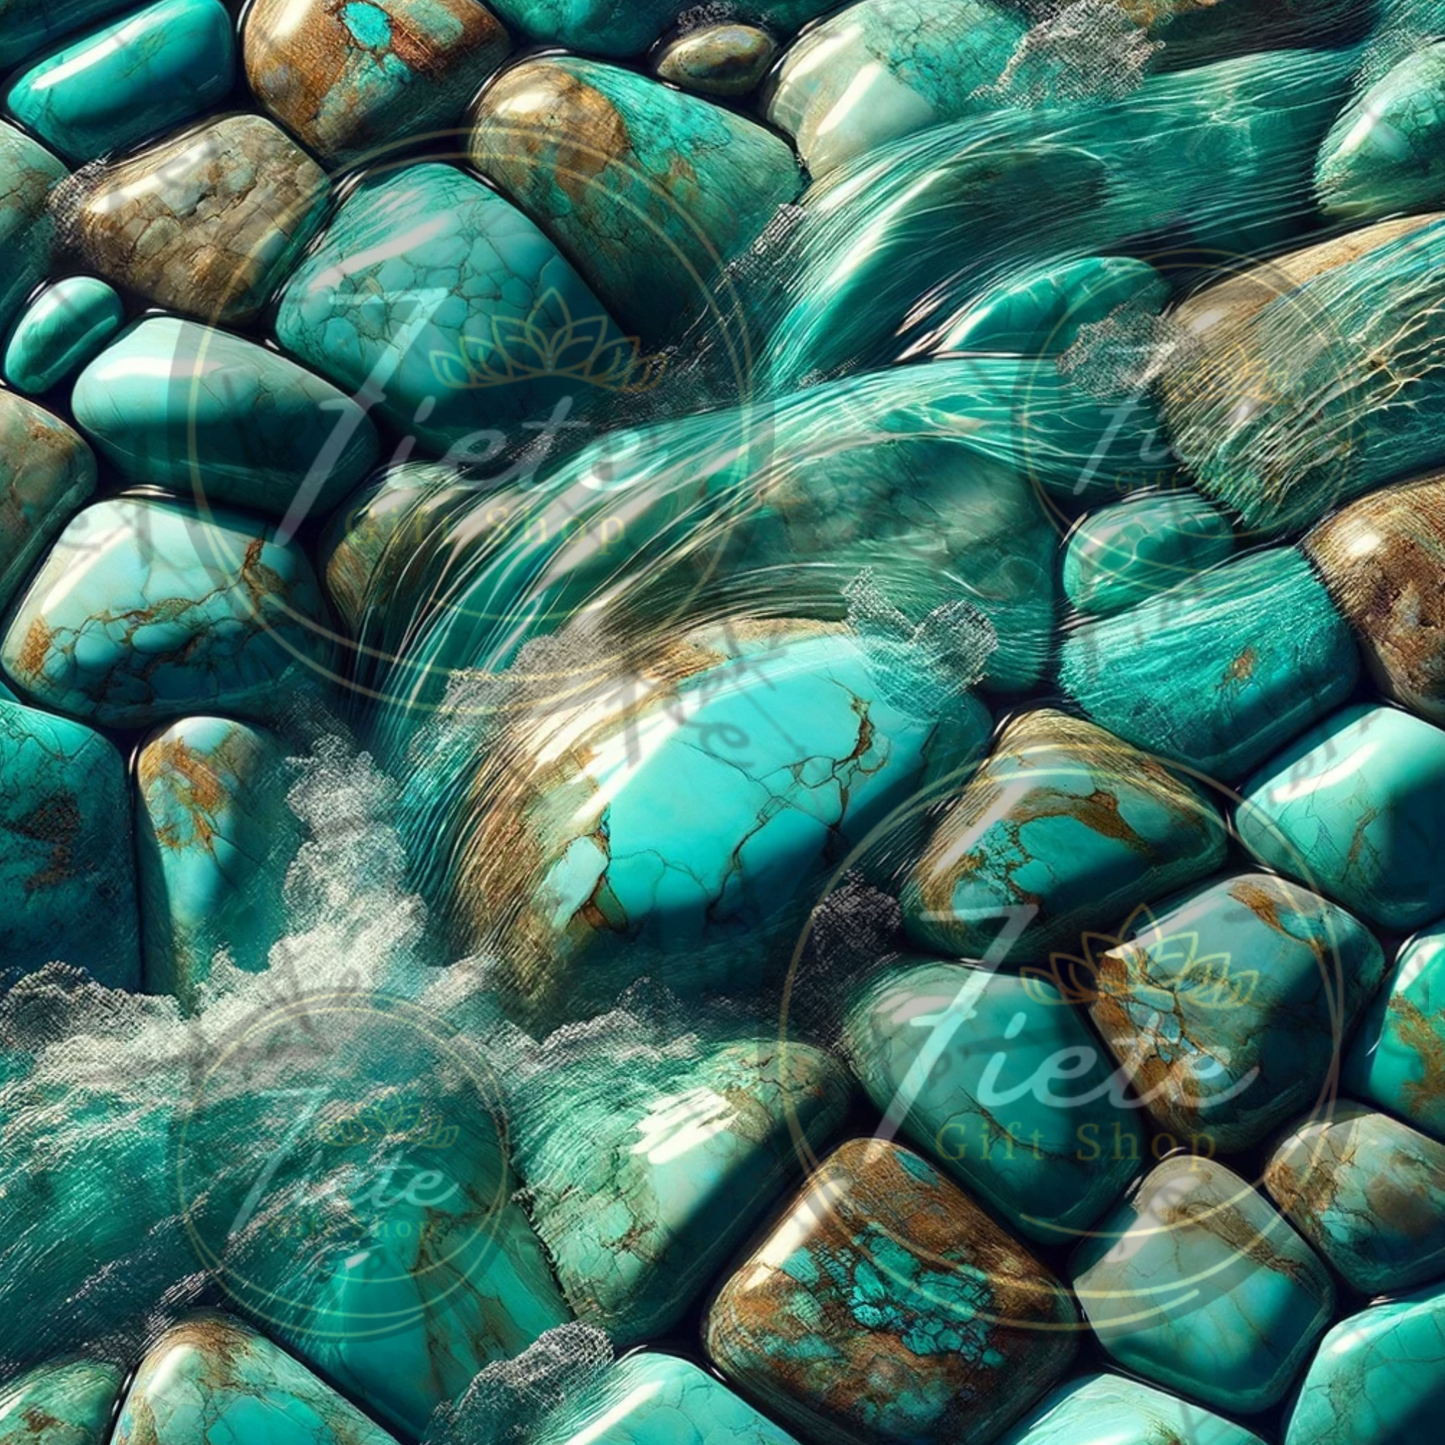 A square filled with an intricate pattern that resembles antique turquoise stones. Water flowing over top of the stones.